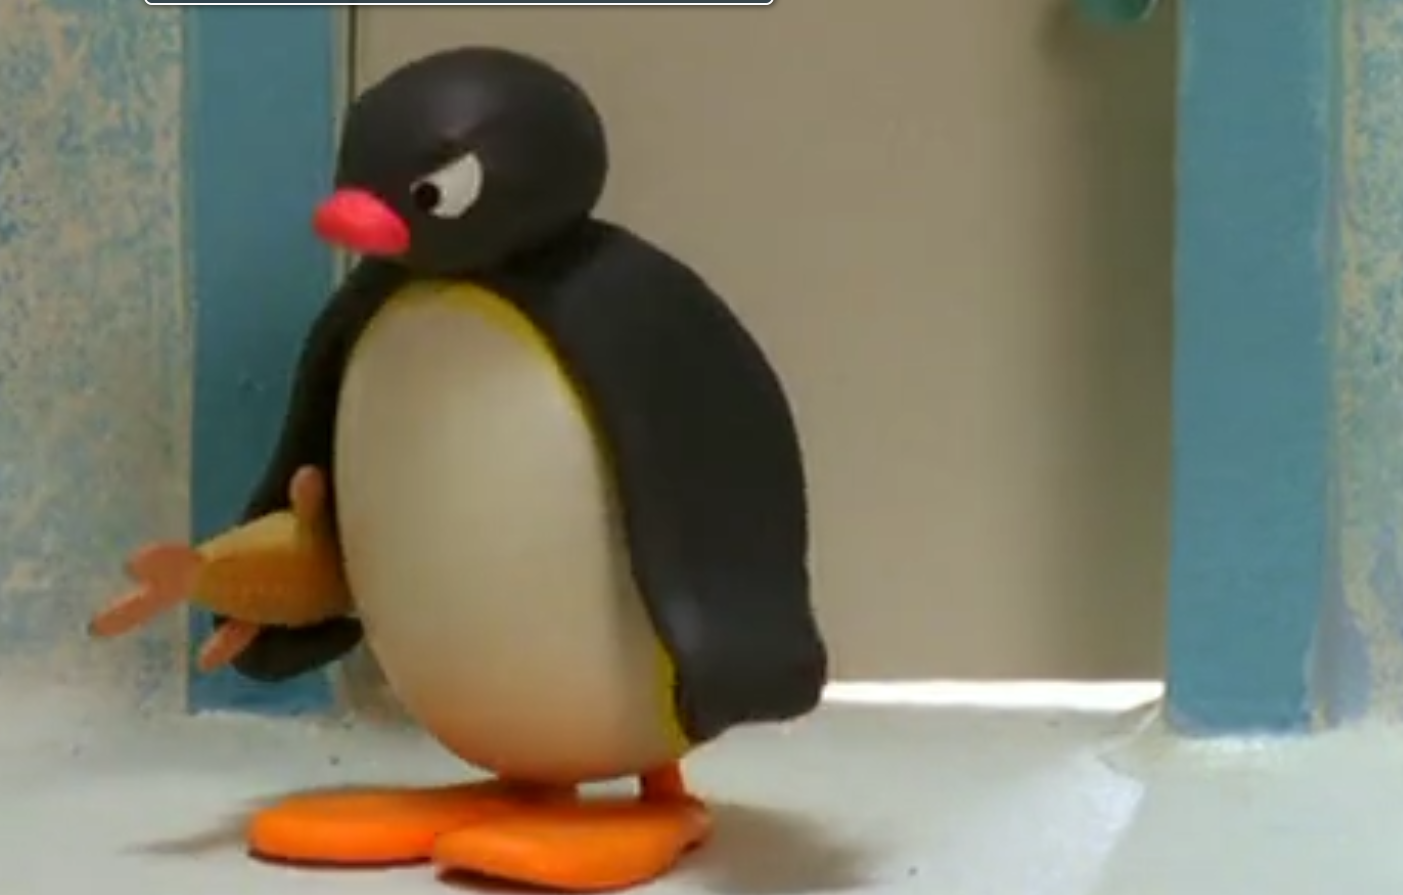 No "Angry Pingu" memes have been featured yet. 